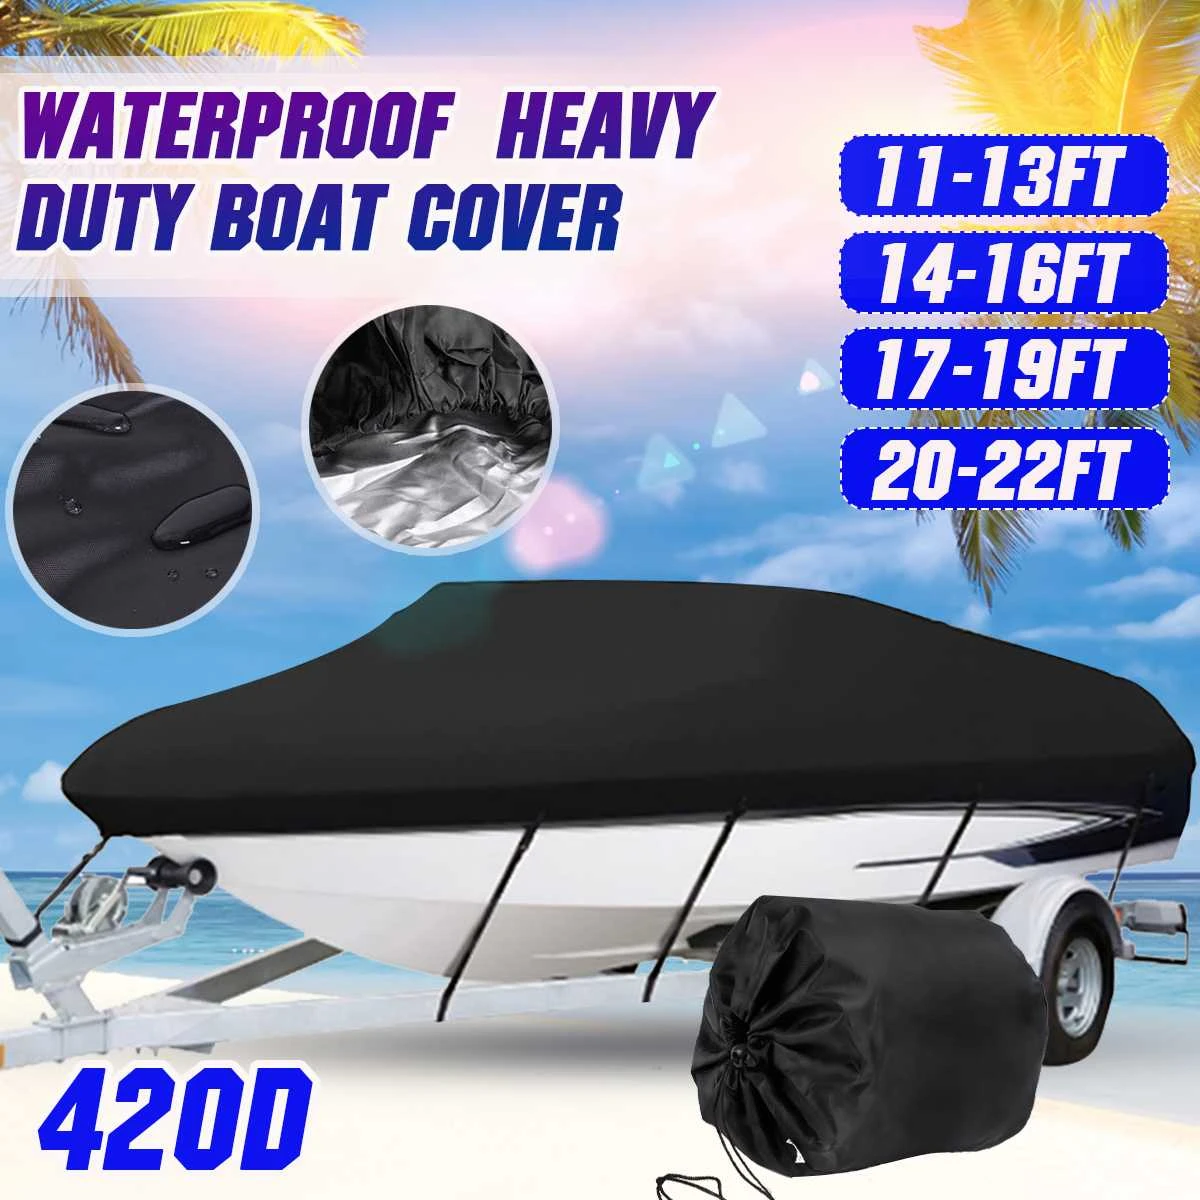 11-22ft Waterproof  Boat Cover Trailerable Ski Fish Bass V-hull Protector Blue